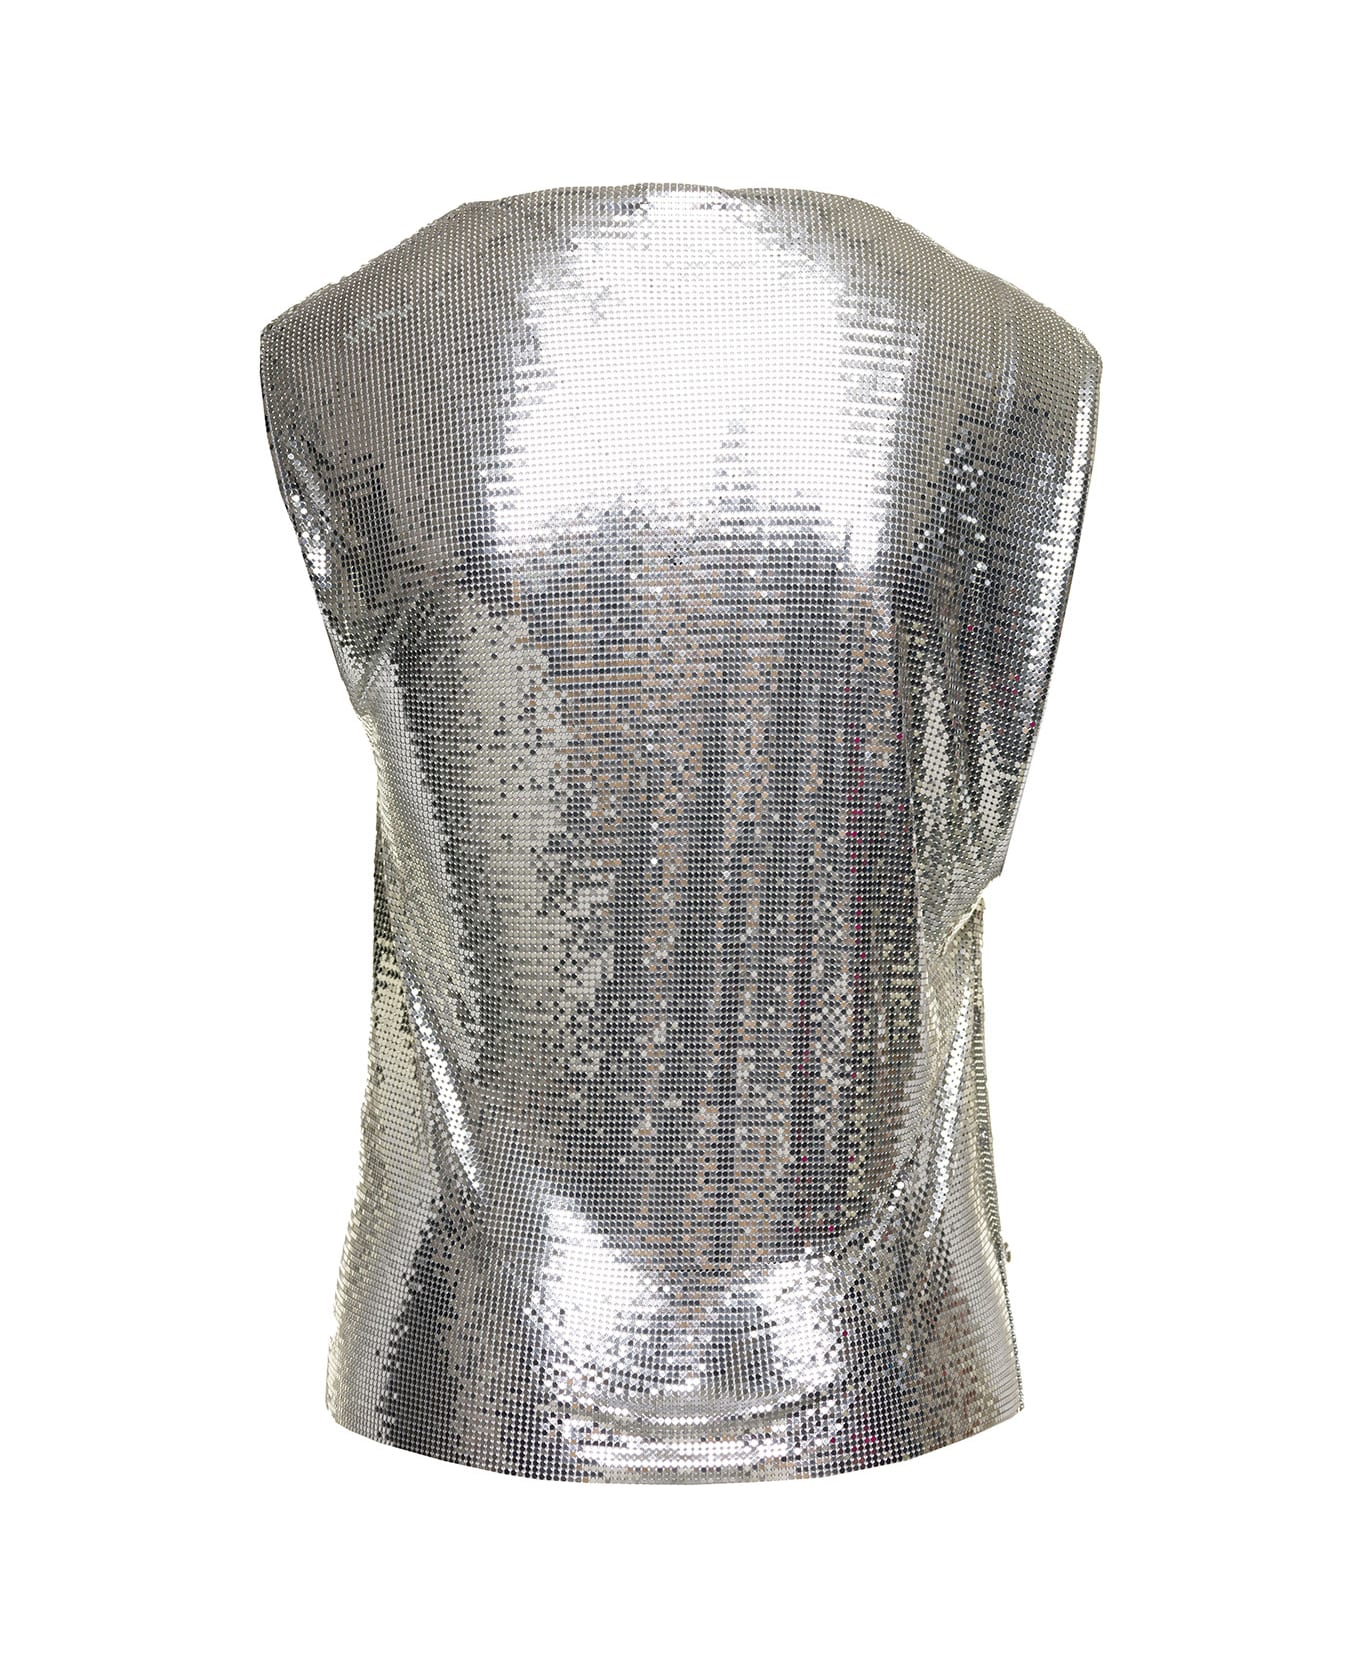 Paco Rabanne Silver-colored Sleeveless Top With Draped Neckline In Metal Mesh Woman - Argento タンクトップ